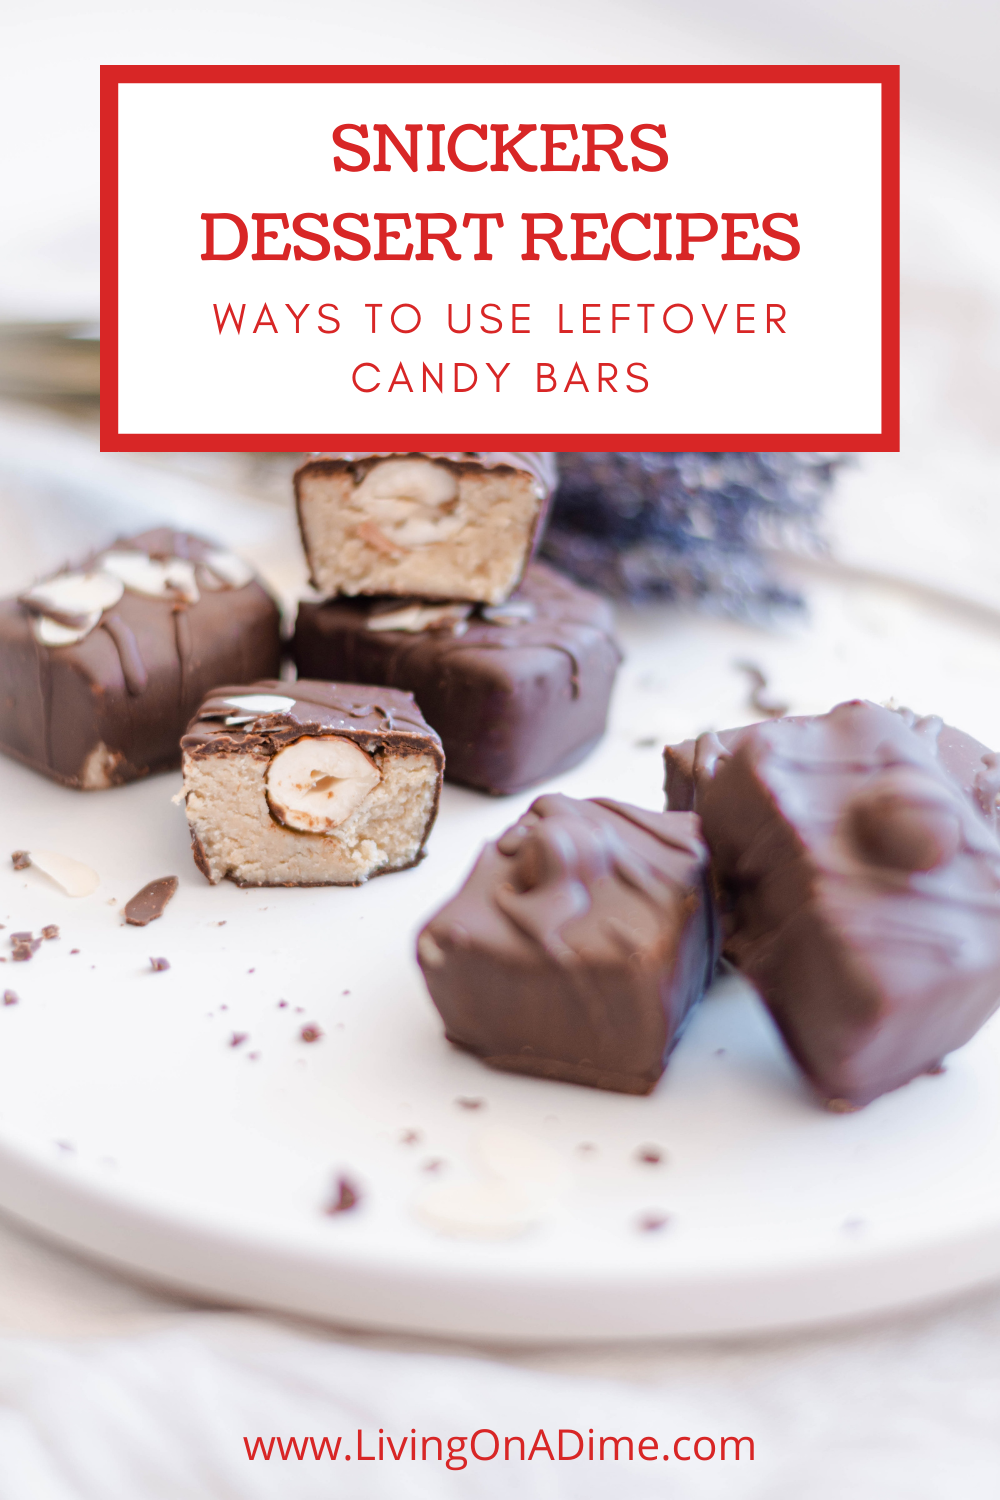 Snickers Dessert Recipes - Ways To Use Leftover Candy Bars